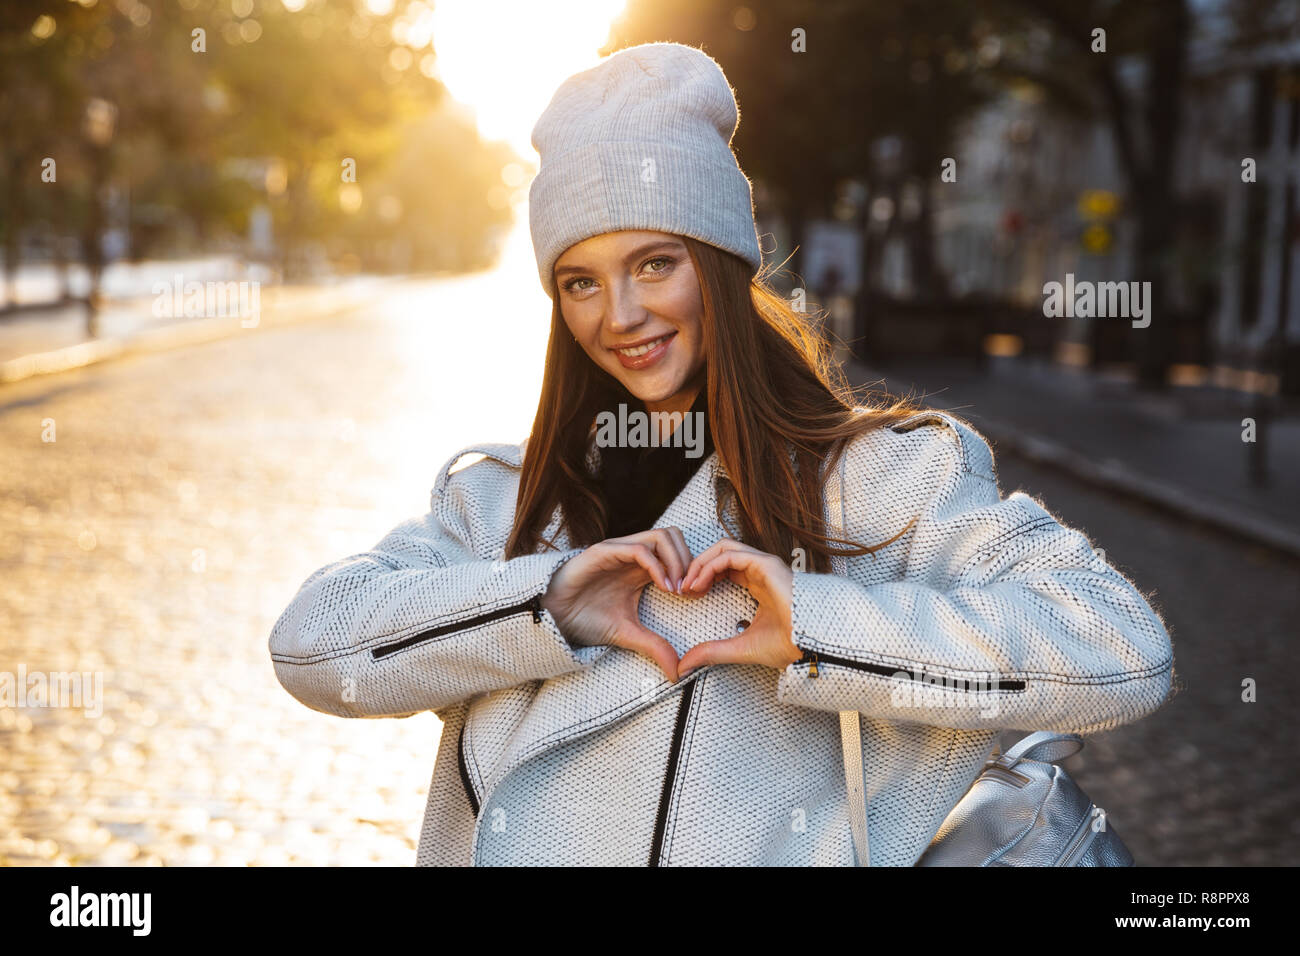 Cheerful young woman dressed in autumn coat and hat walking outdoors at the city street Stock Photo